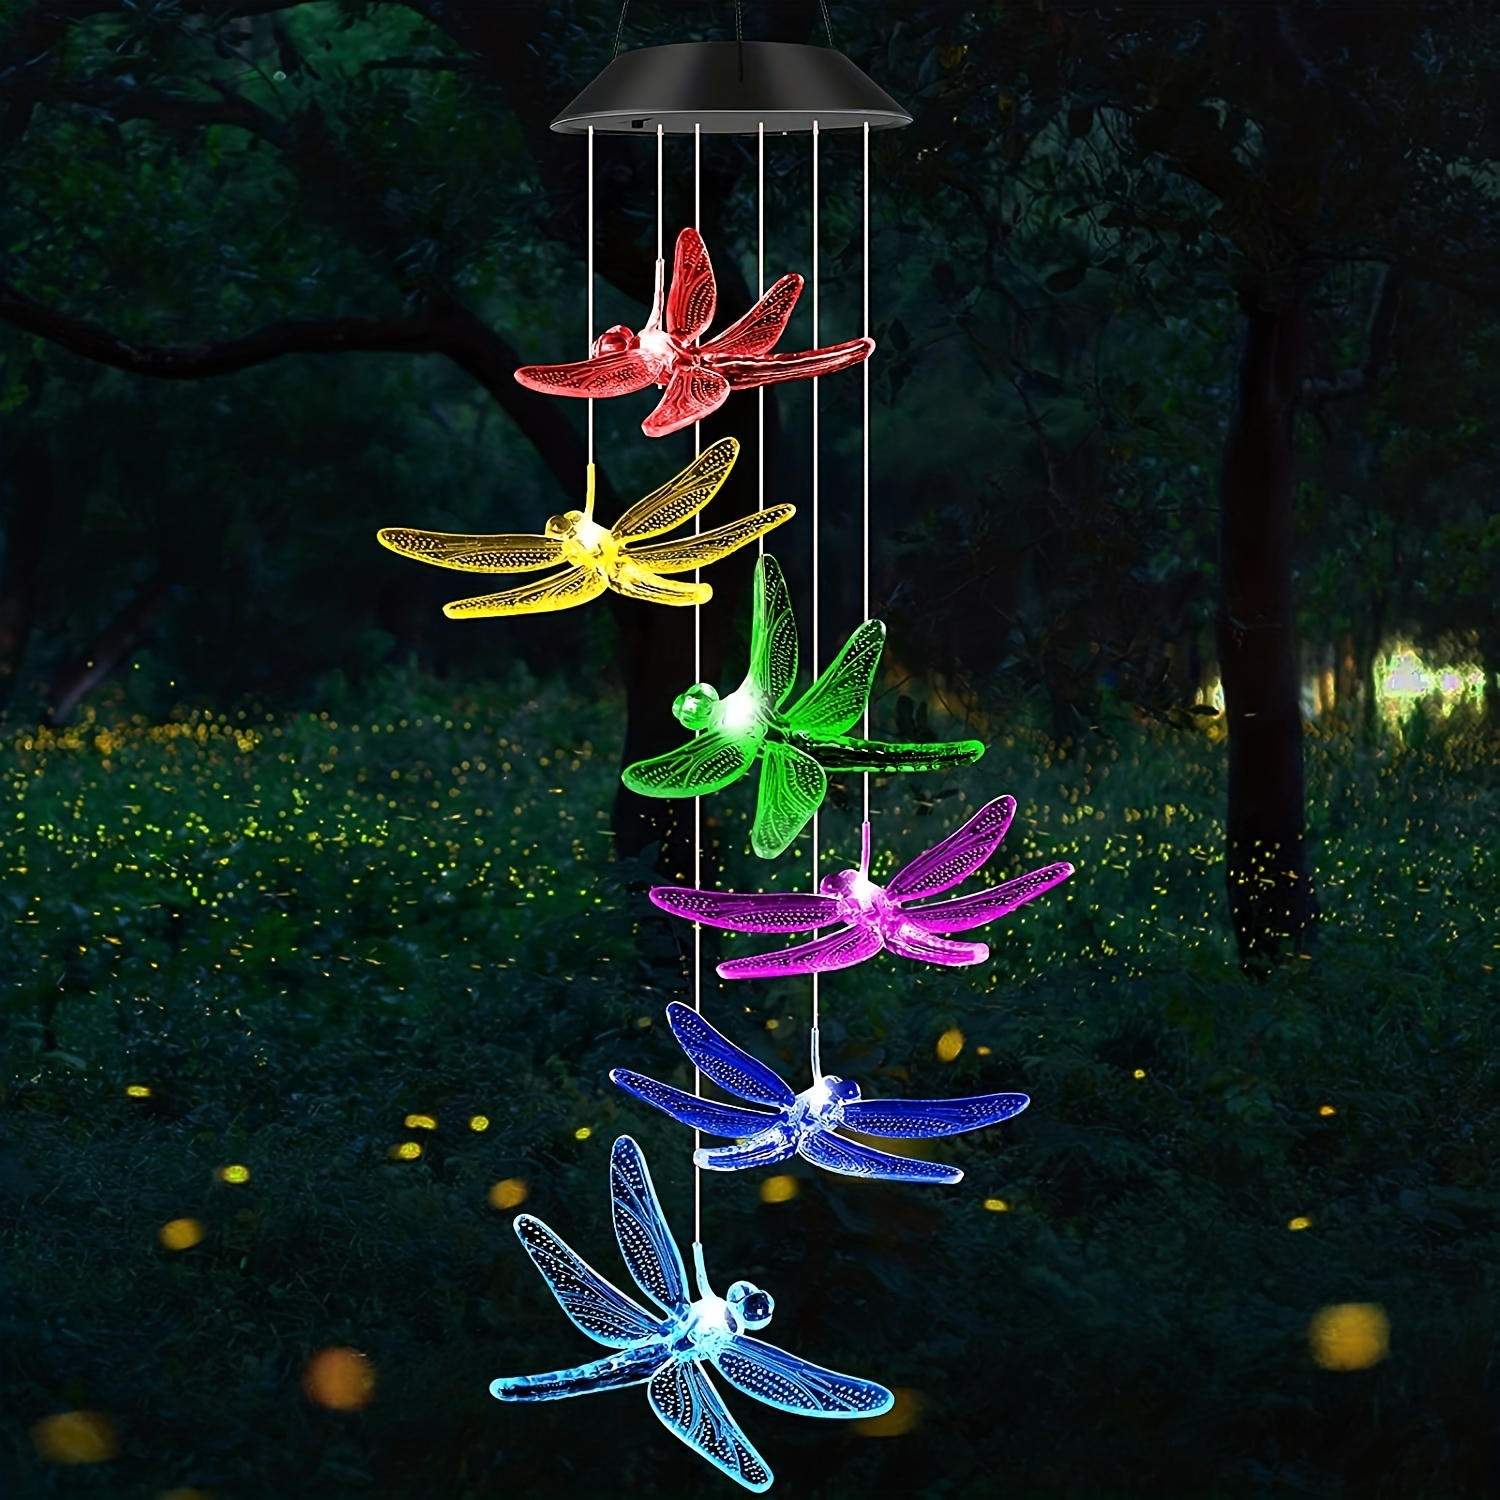 

1pc Solar-powered Dragonfly Wind Chime Light, Led Color-changing Outdoor Hanging Decorative Lamp, Festival Atmosphere Landscape Lighting For Villa Garden Courtyard